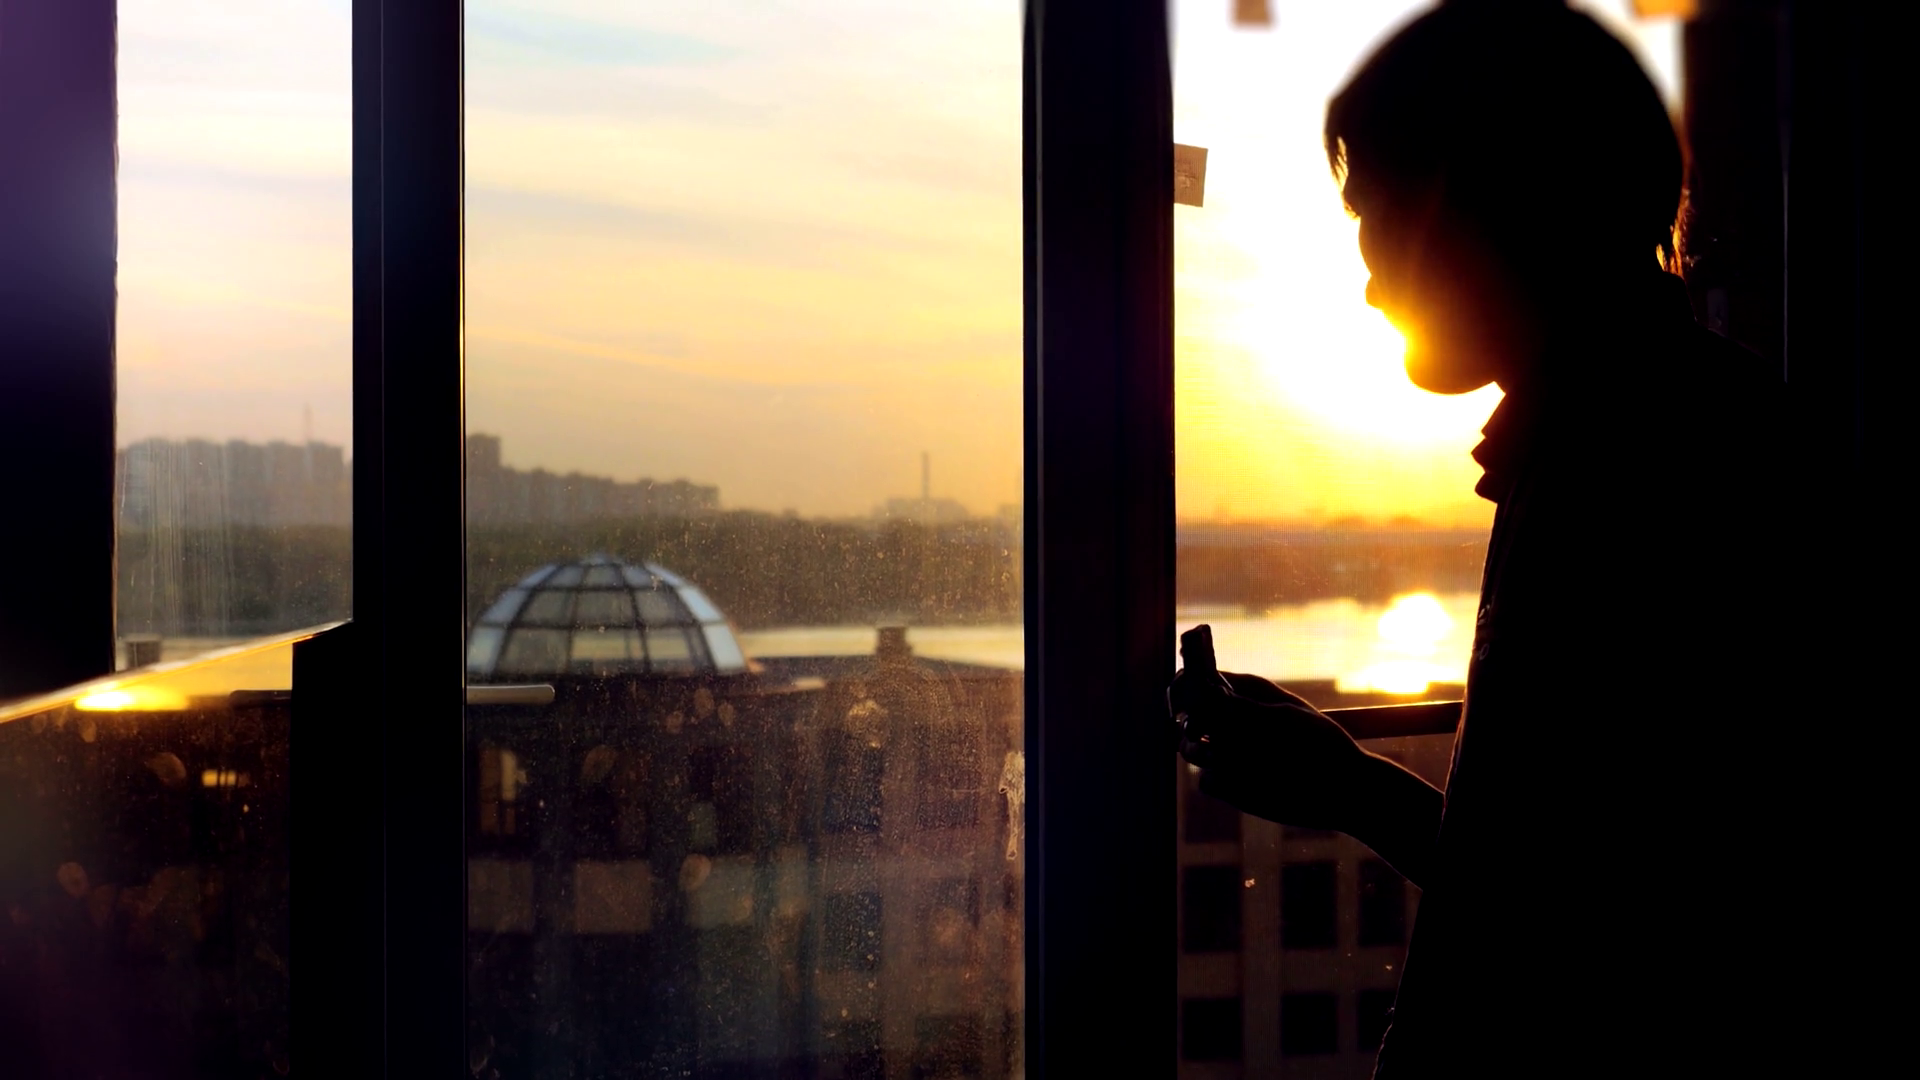 back-view-of-young-man-sitting-on-window-with-coffee-cup-has-a-breakfast-looking-at-dawn-city-scenery-handsome-casual-guy-relaxing-and-watching-sunrise-3840x2160_bpajc76c_thumbnail-full01.png